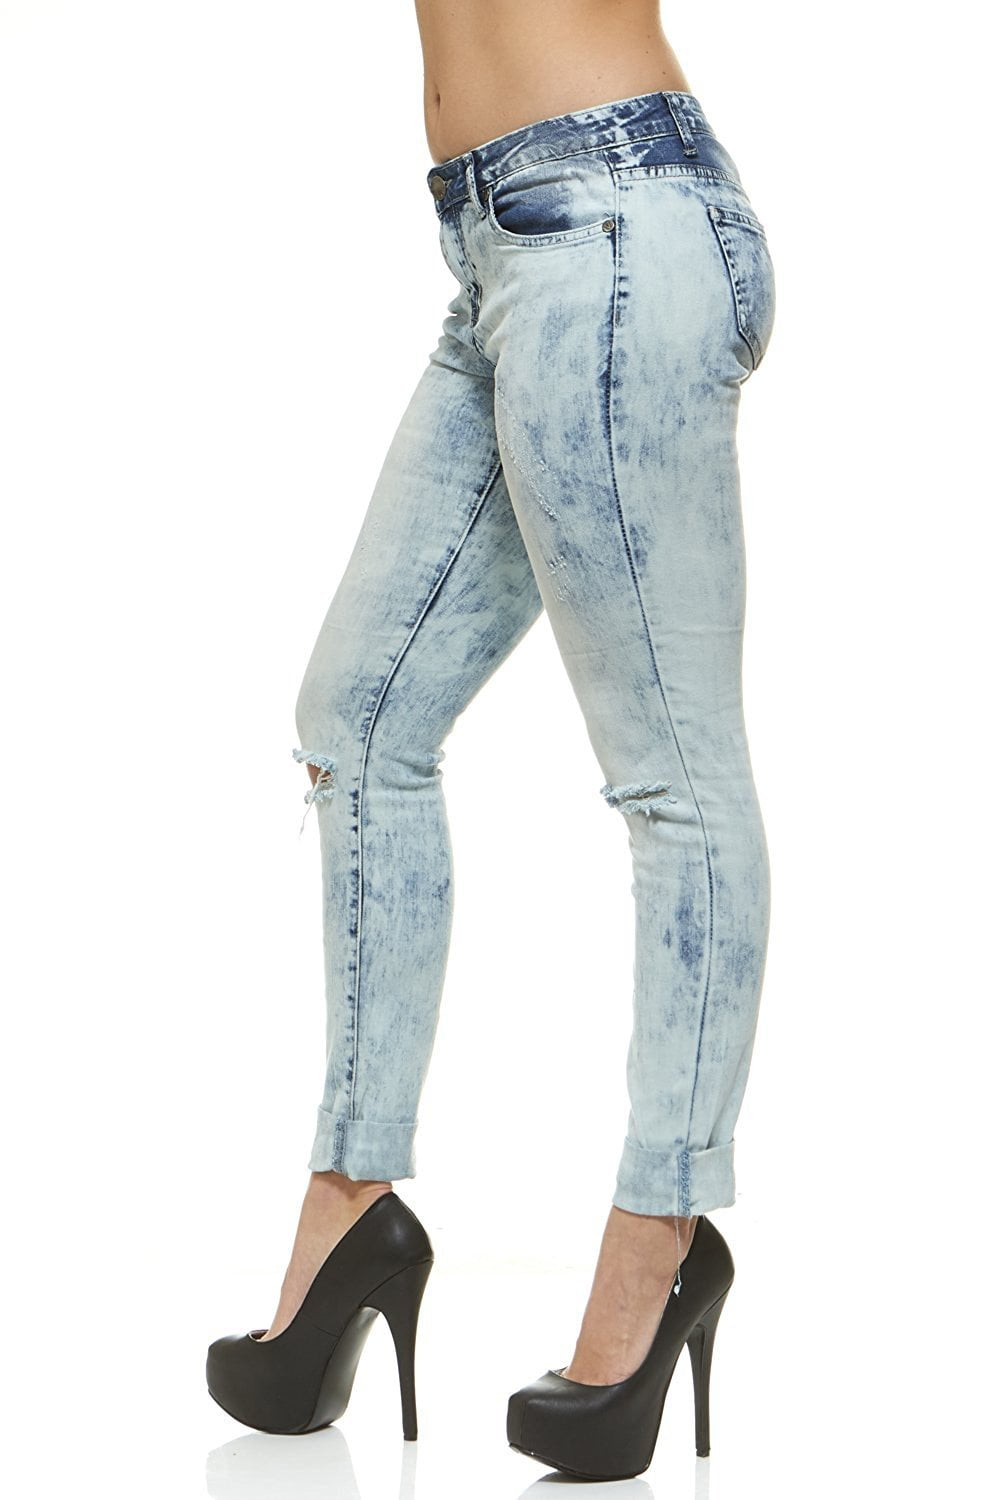 V.I.P.JEANS Ripped Distressed Skinny Mid-Rise Washed Jeans For Women 5 ...